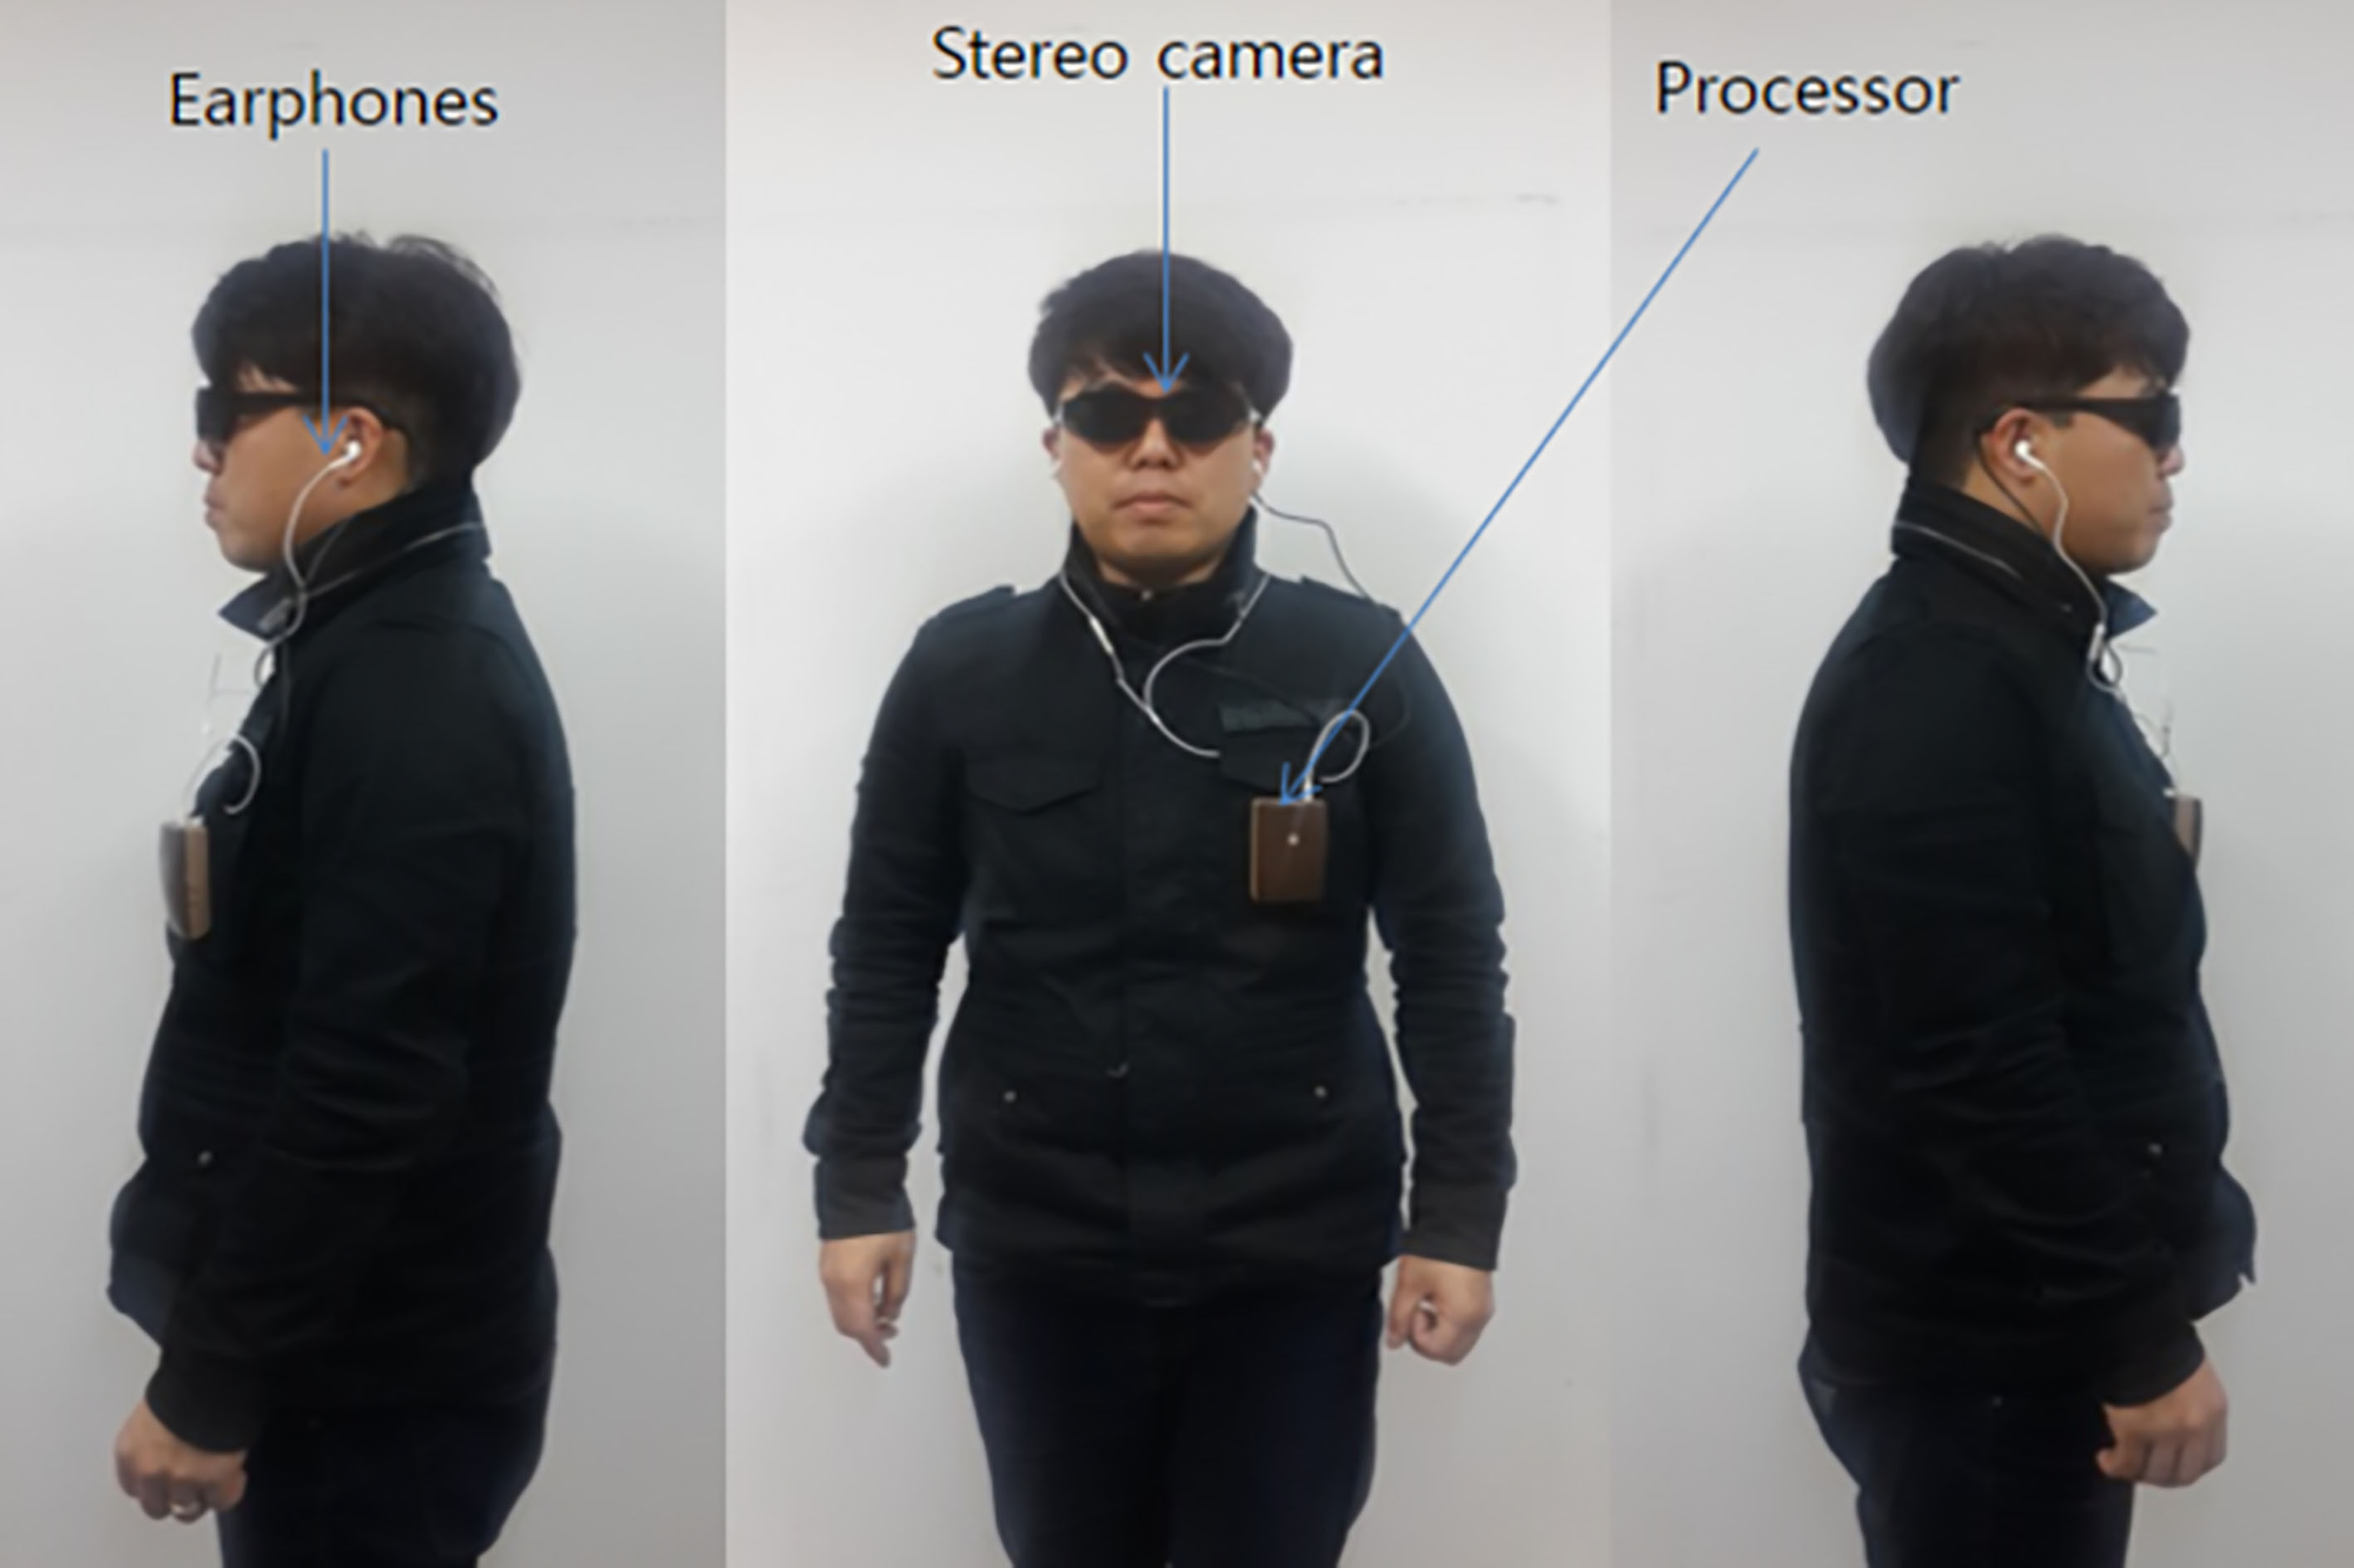 Components of Visual System on a user. The chest has the main system; earphones and stereo camera (in the pair of glasses) are also present.